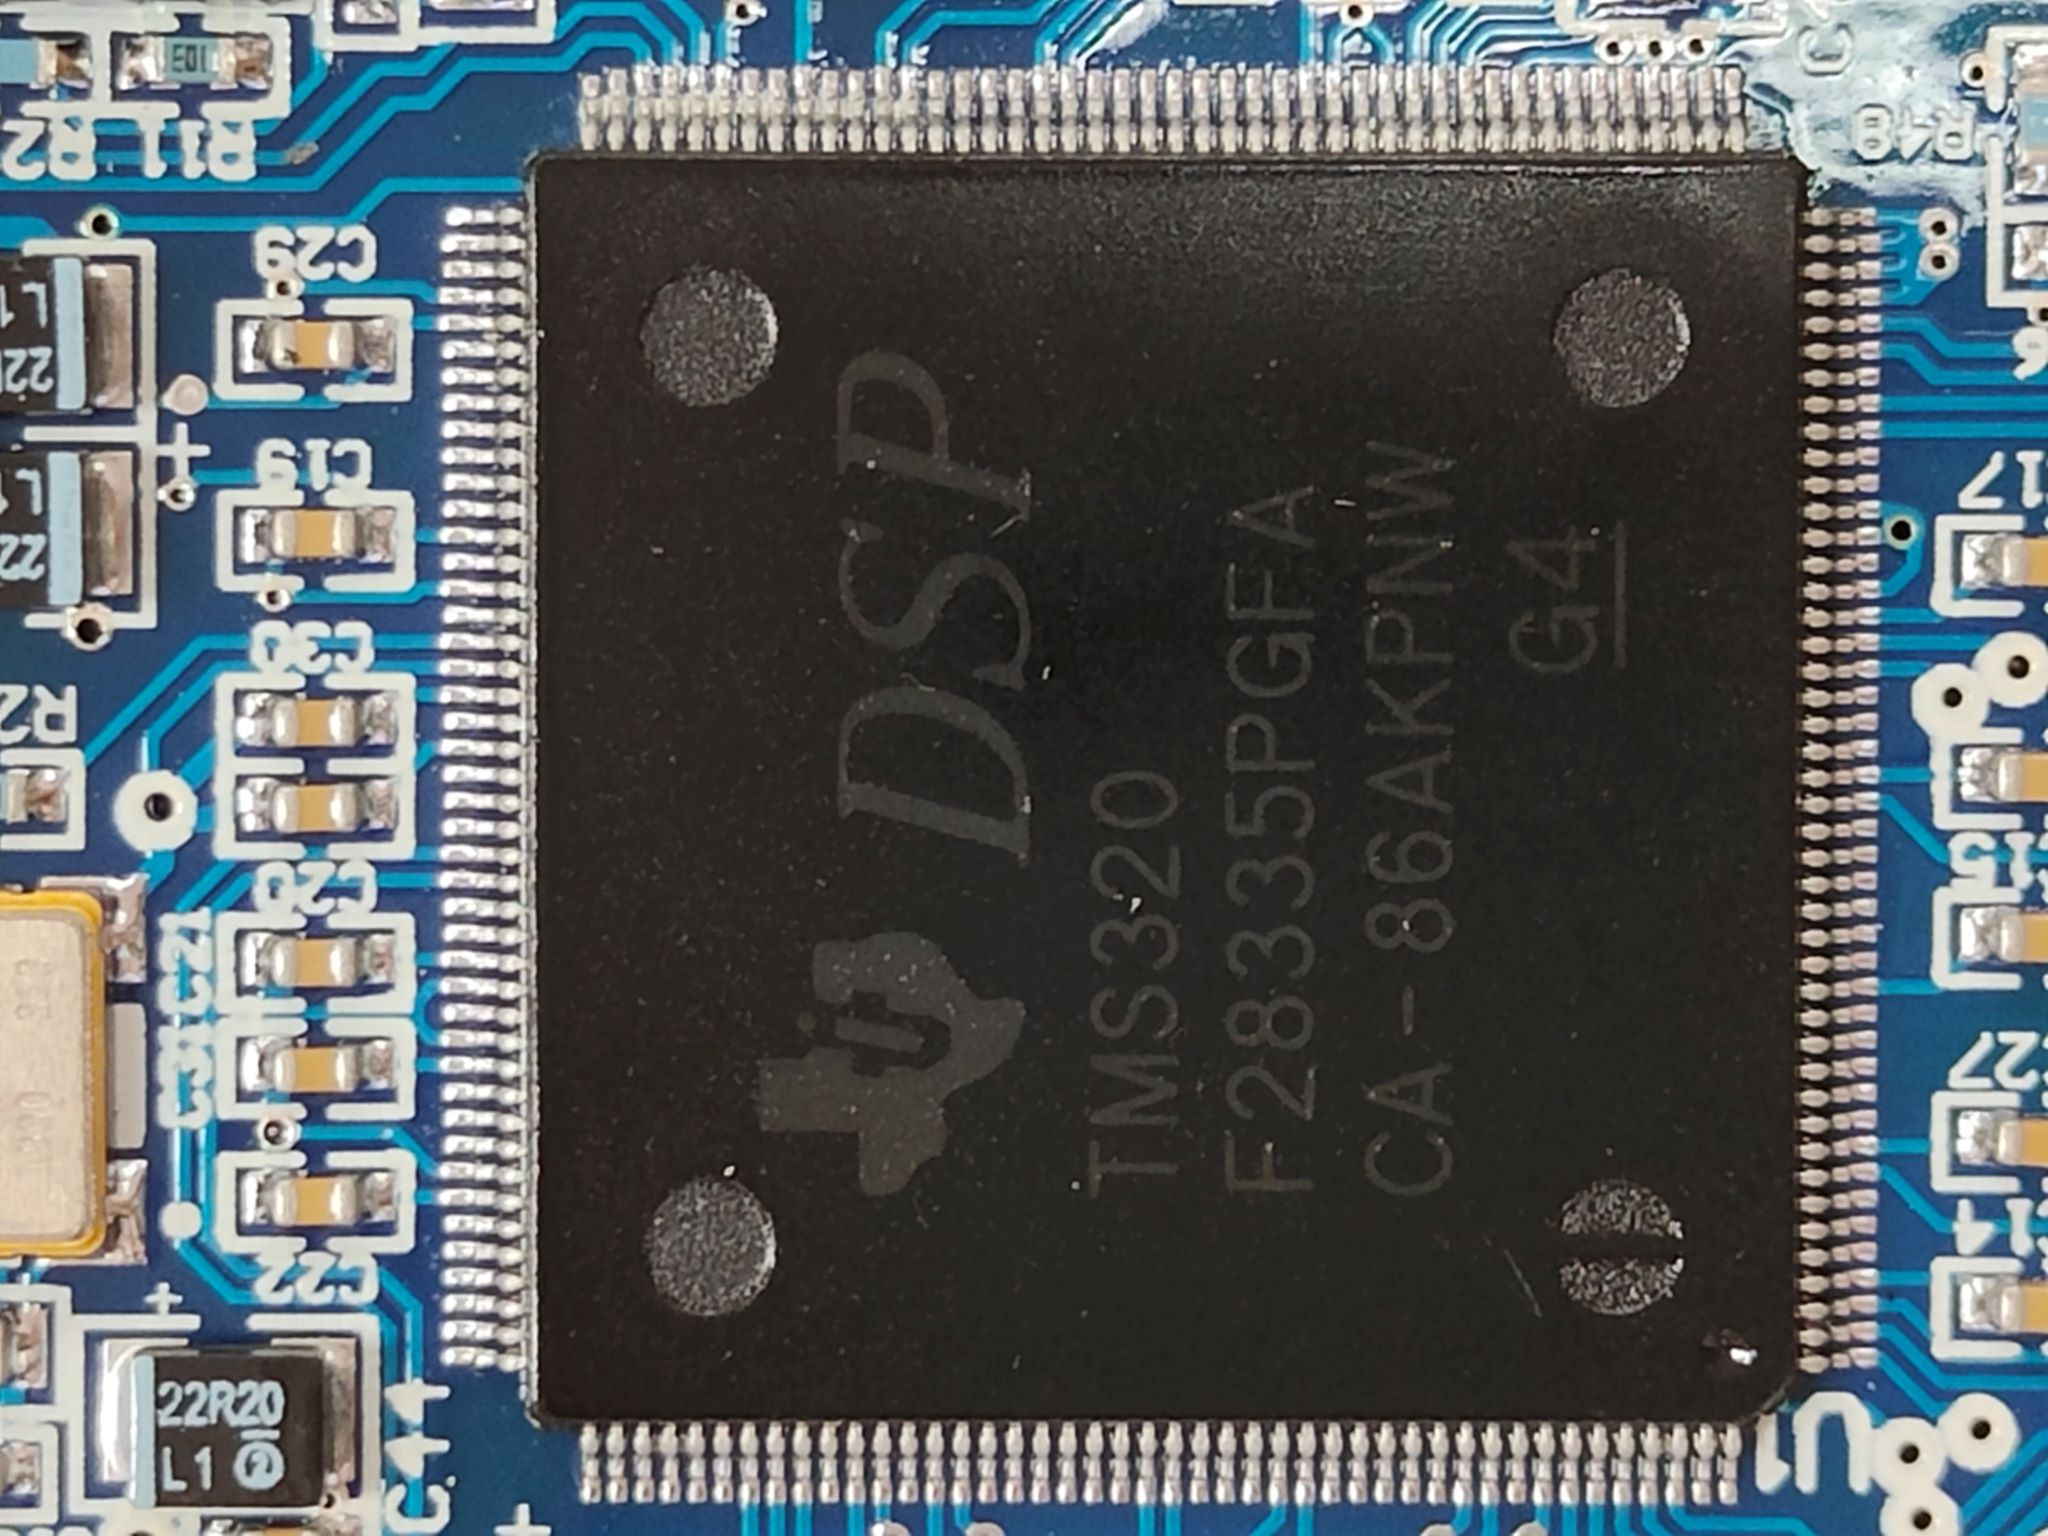 Real-time microcontroller with DSP connection manager